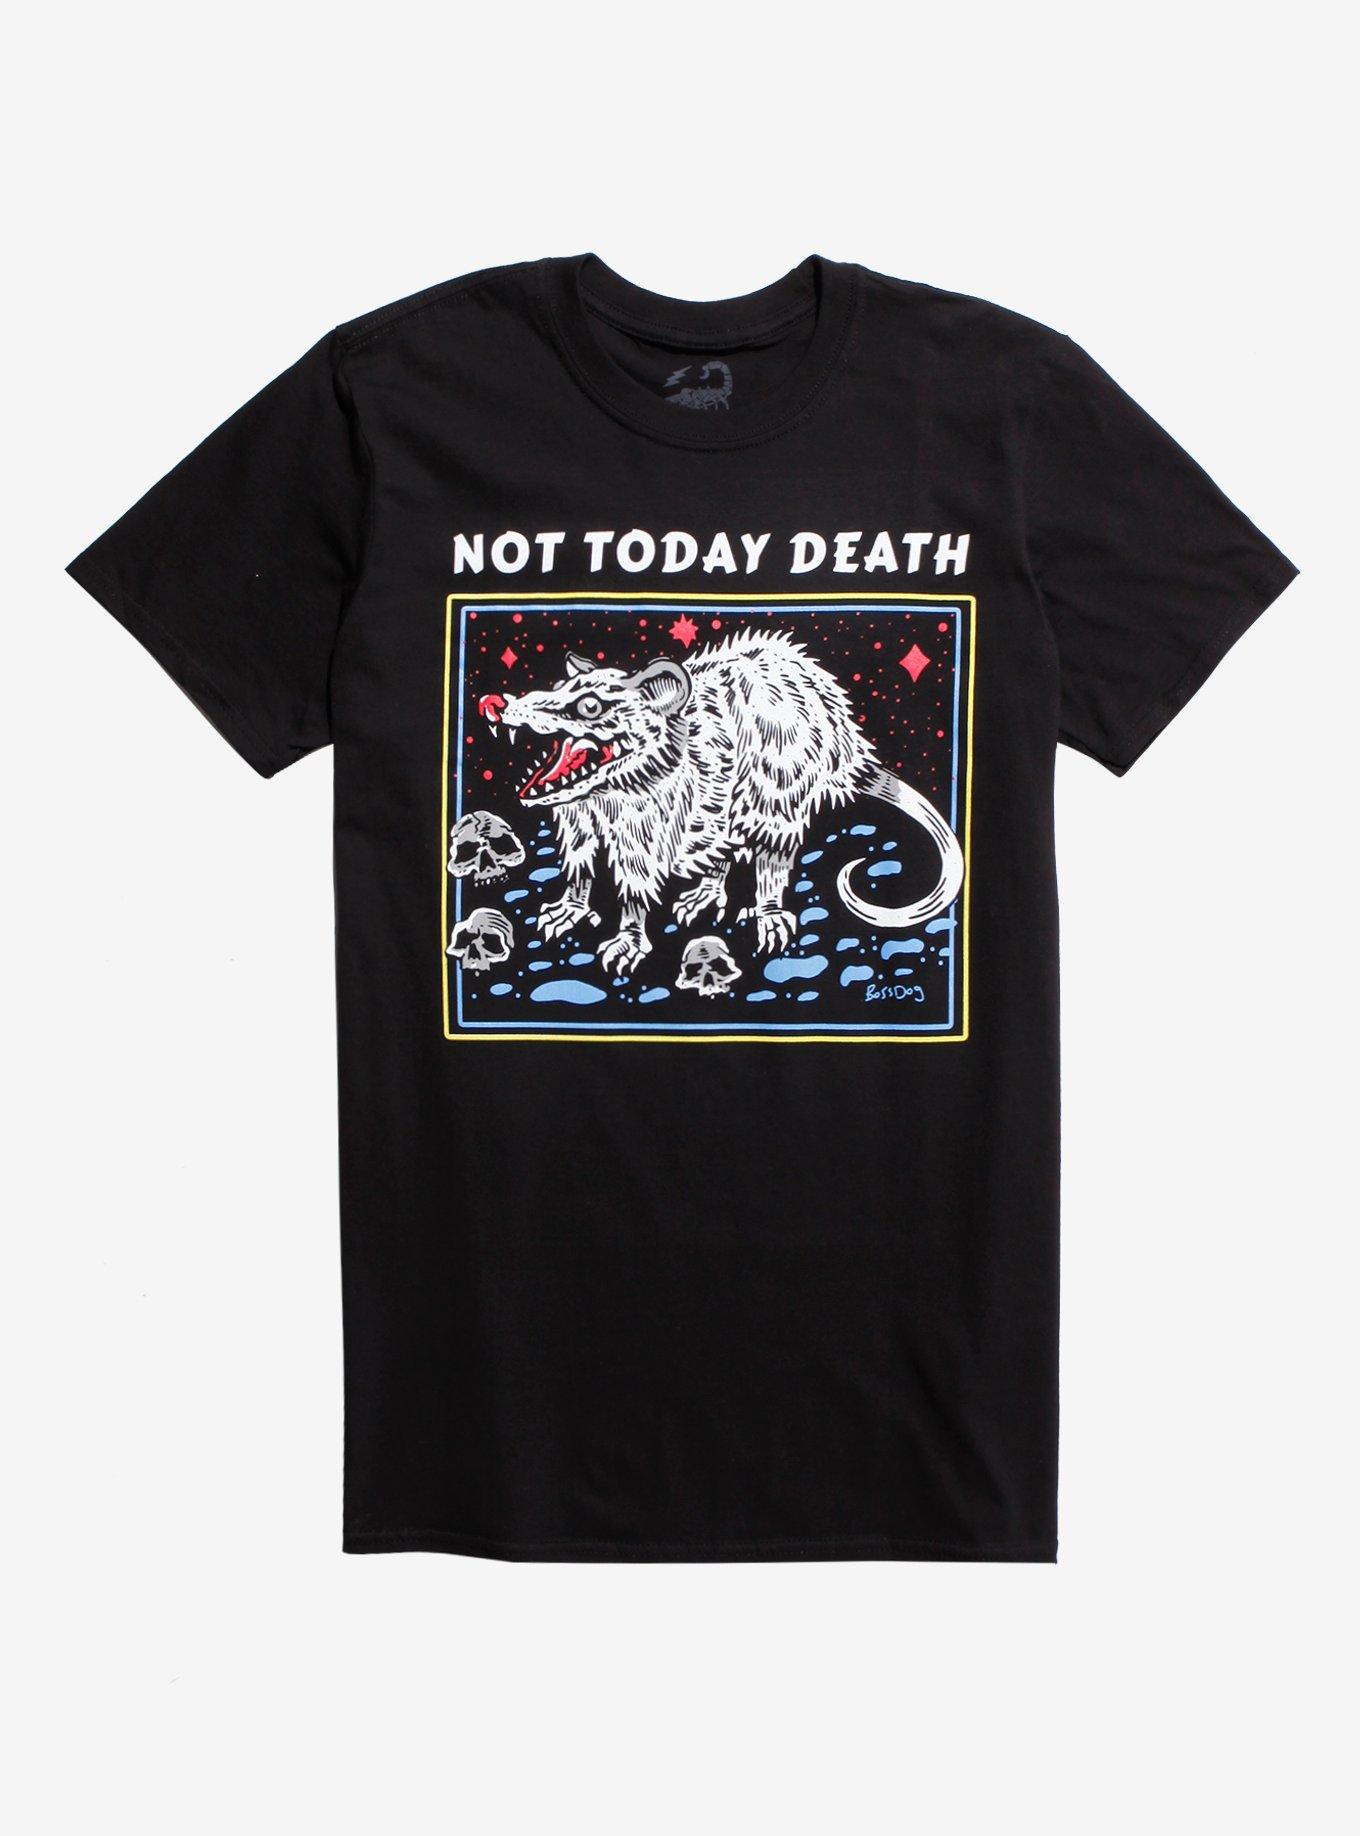 Not Today Death T-Shirt By Boss Dog Hot Topic Exclusive, BLACK, hi-res